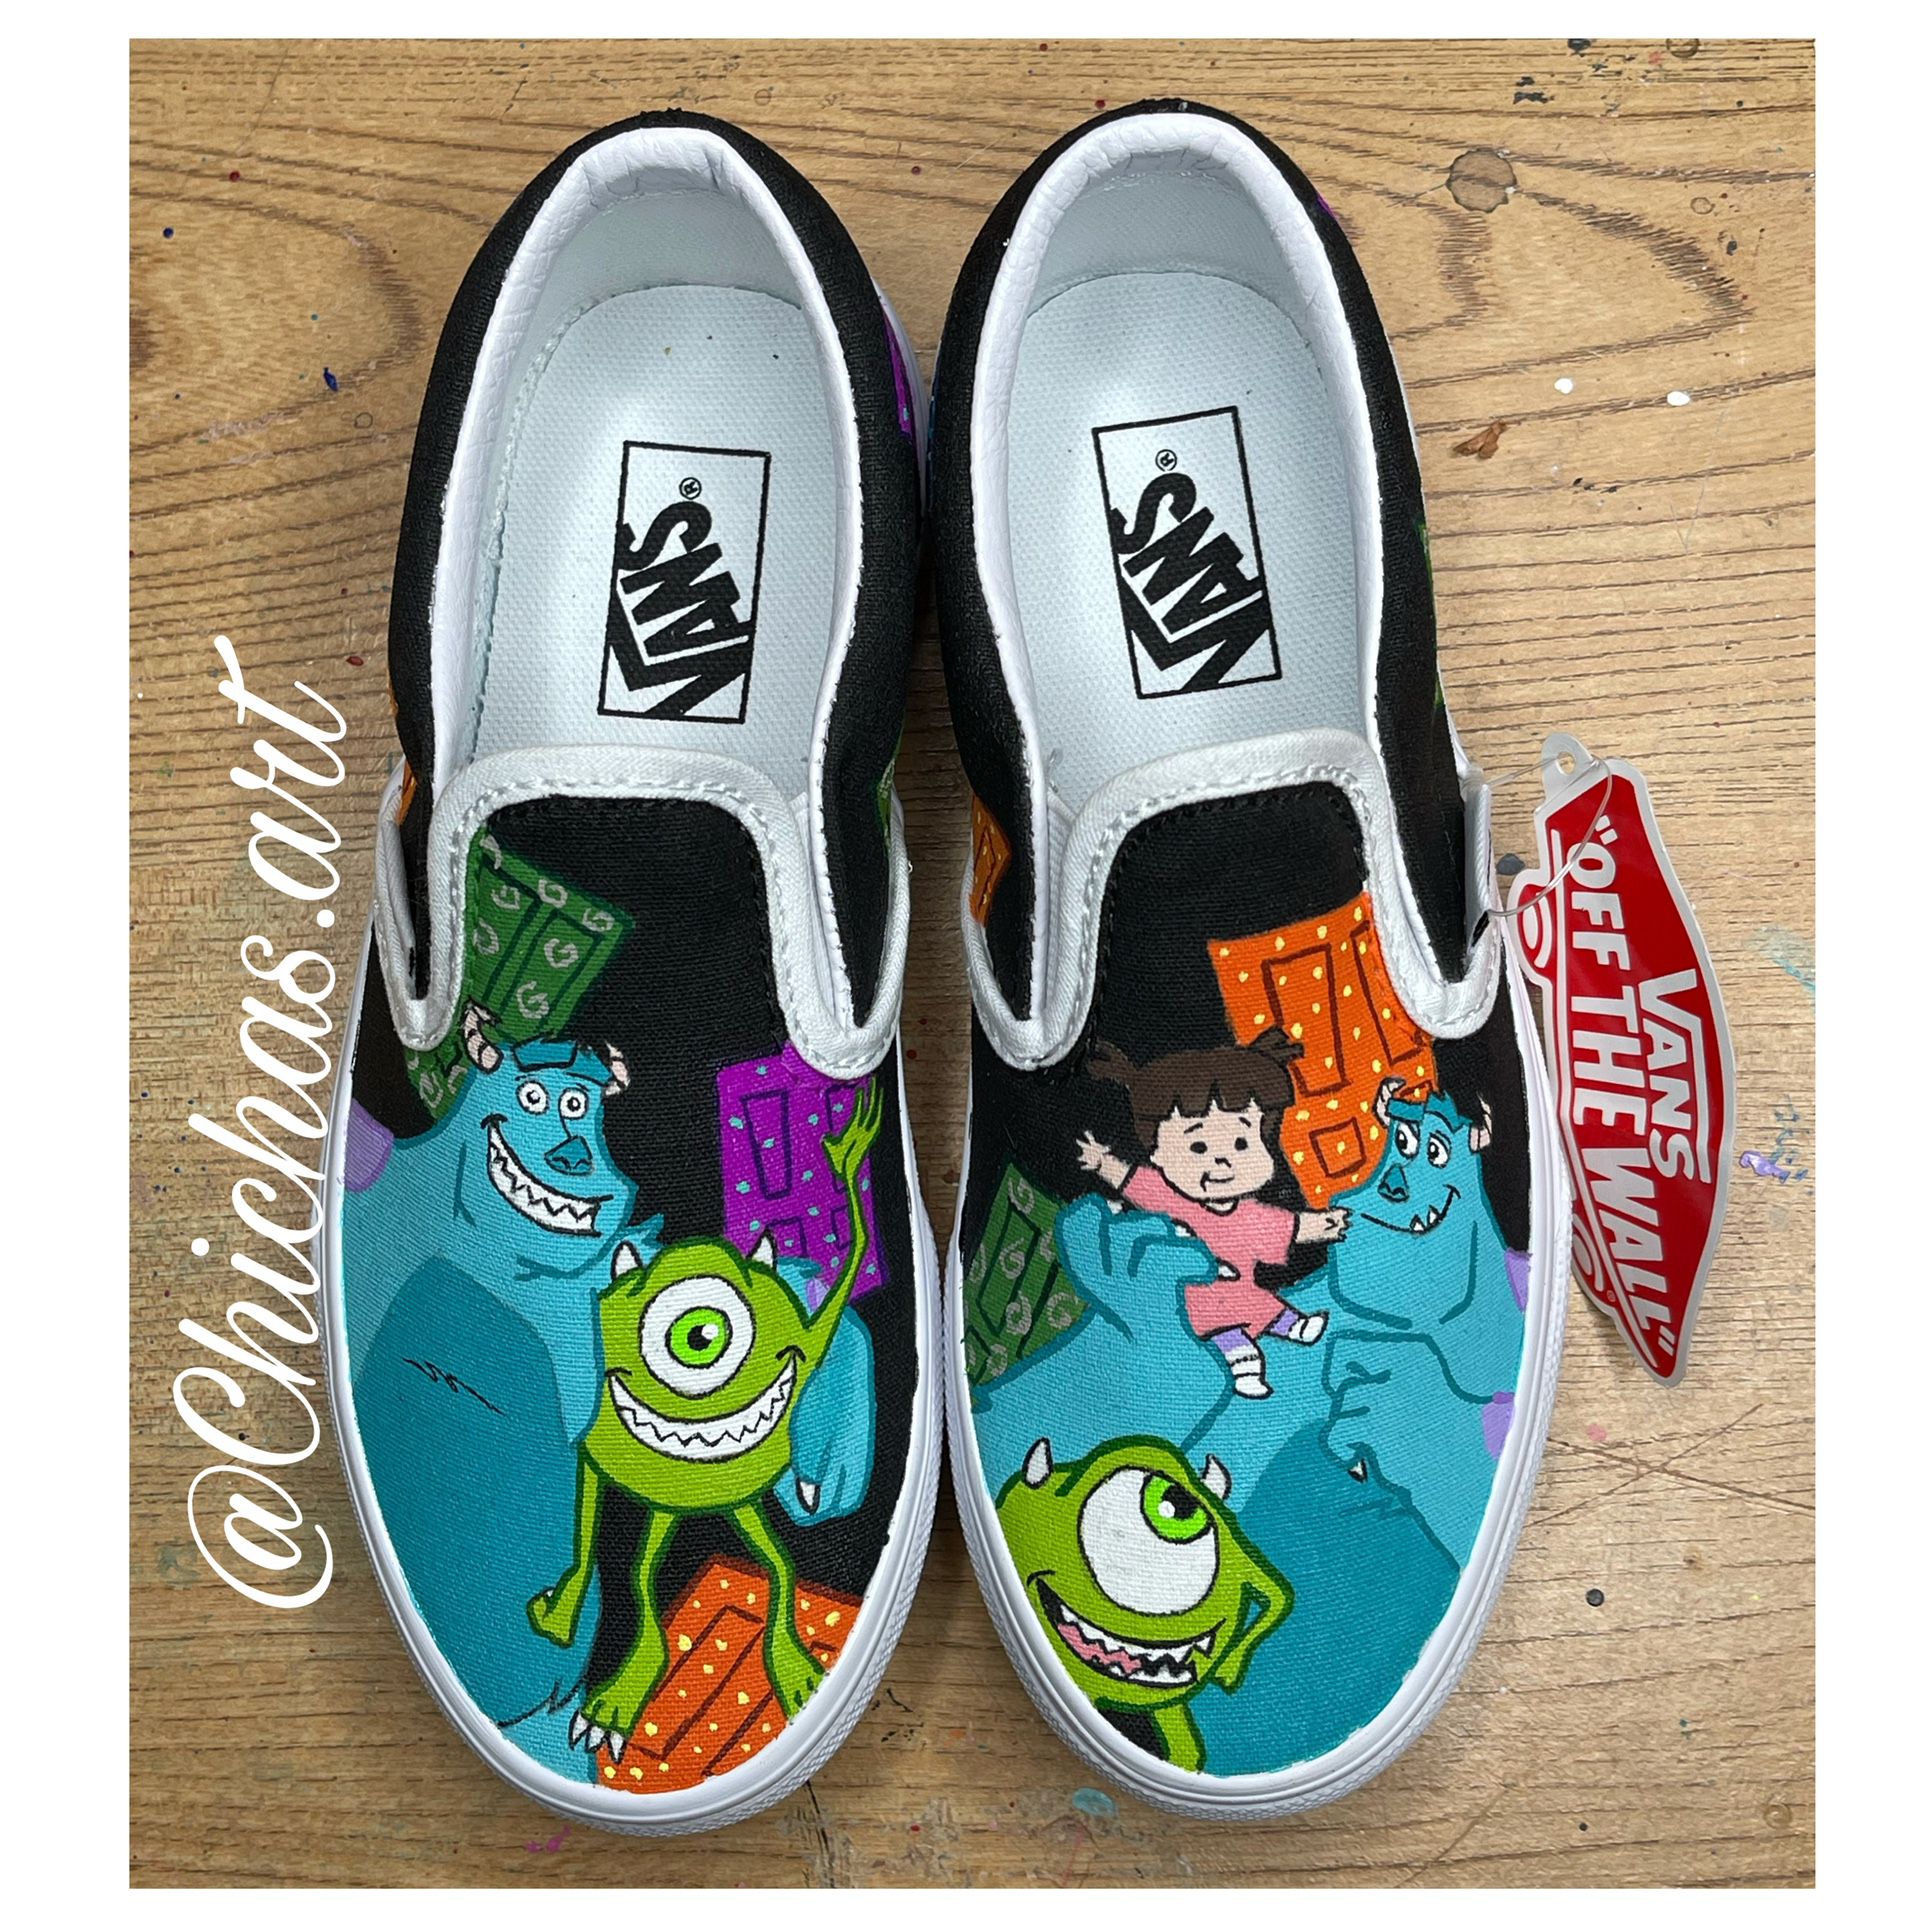 Custom Painted Shoes! Disney Princess Beauty And The Beast Belle, Toy Story, Hercules, Naurto, Haunted Mansion , Disneyland, Rick And Morty, Coco,